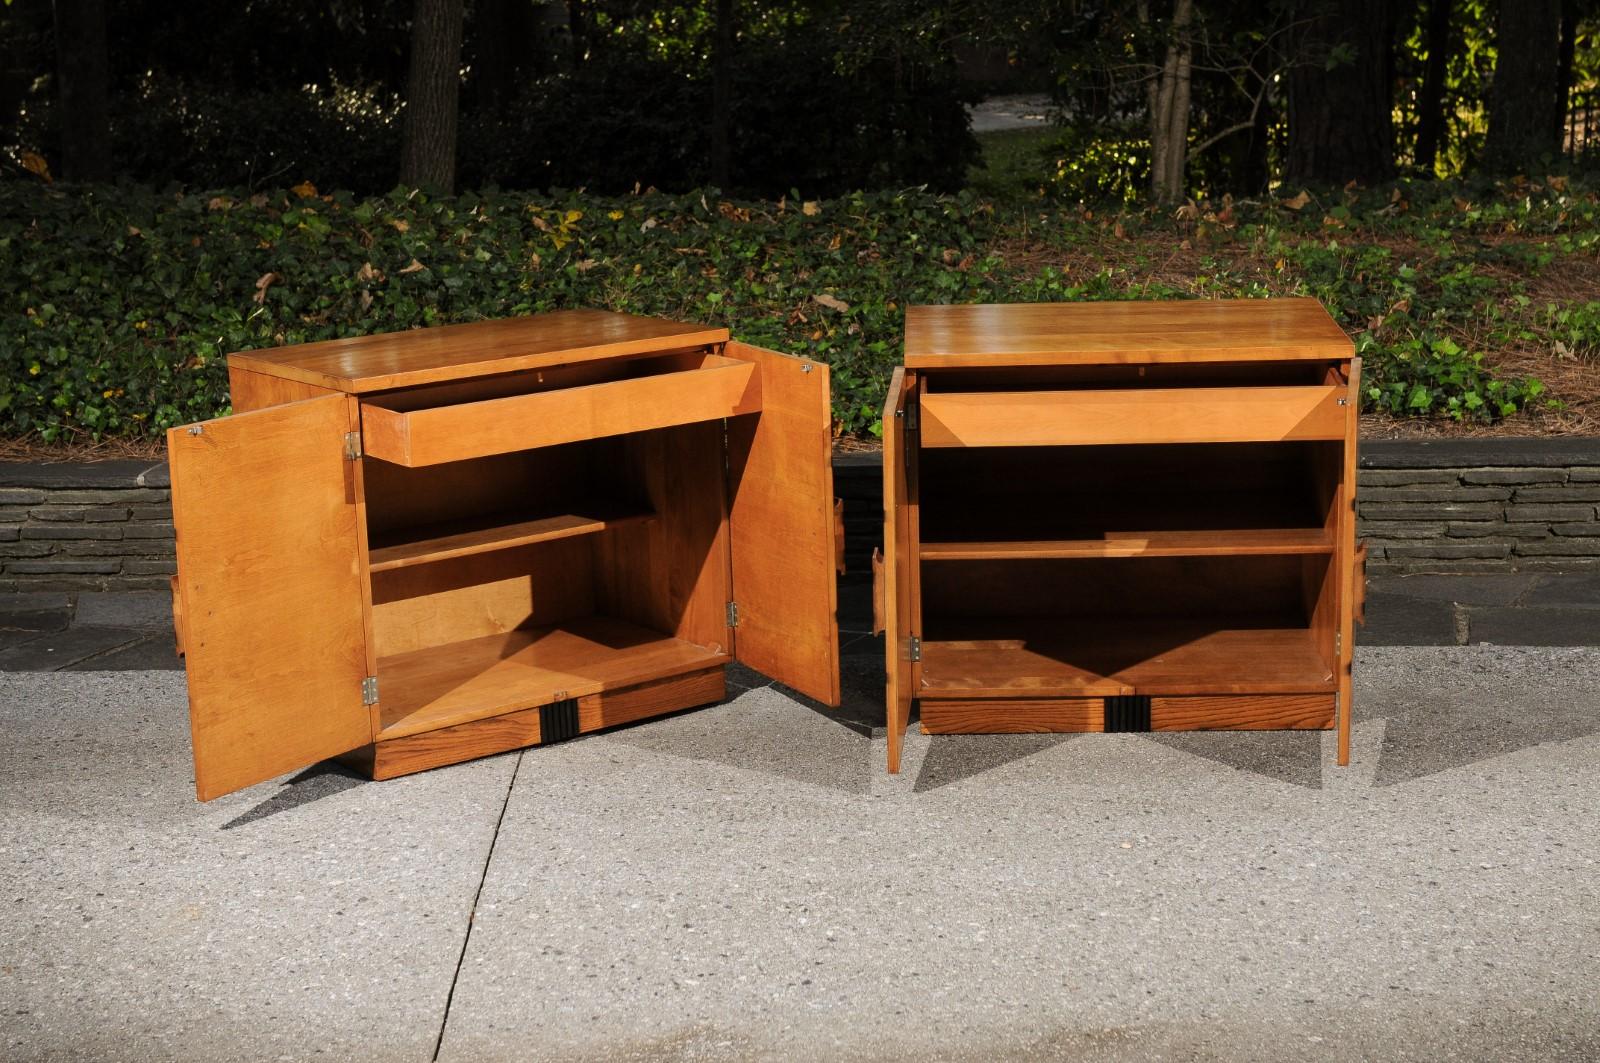 Striking Restored Pair of Art Deco Cabinets by John Stuart, circa 1940 For Sale 1